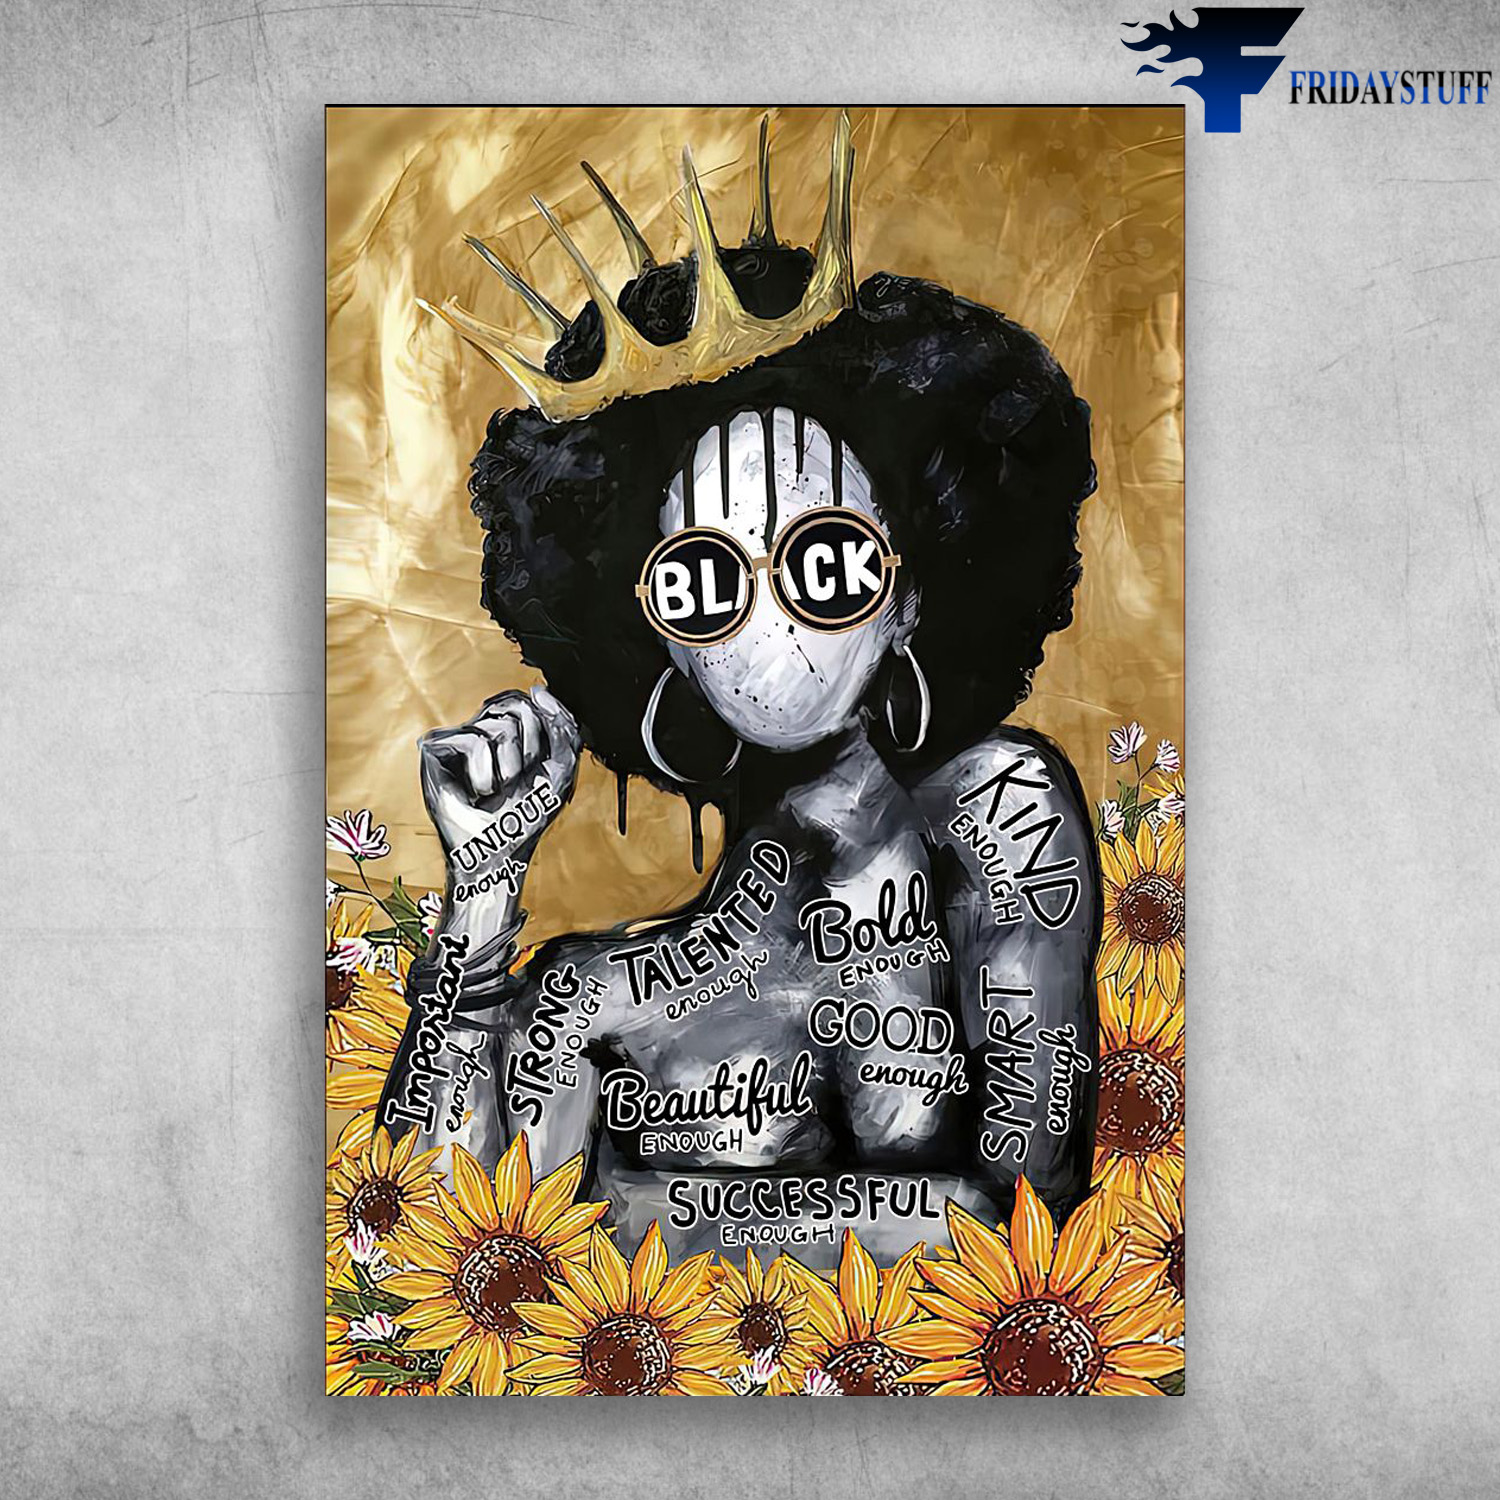 Black Queen - Black Women, Unique, Talented, Bold, Kind, Smart, Good, Beautiful, Successful, Strong, Important, Sunflower, Gift For Mother's Day